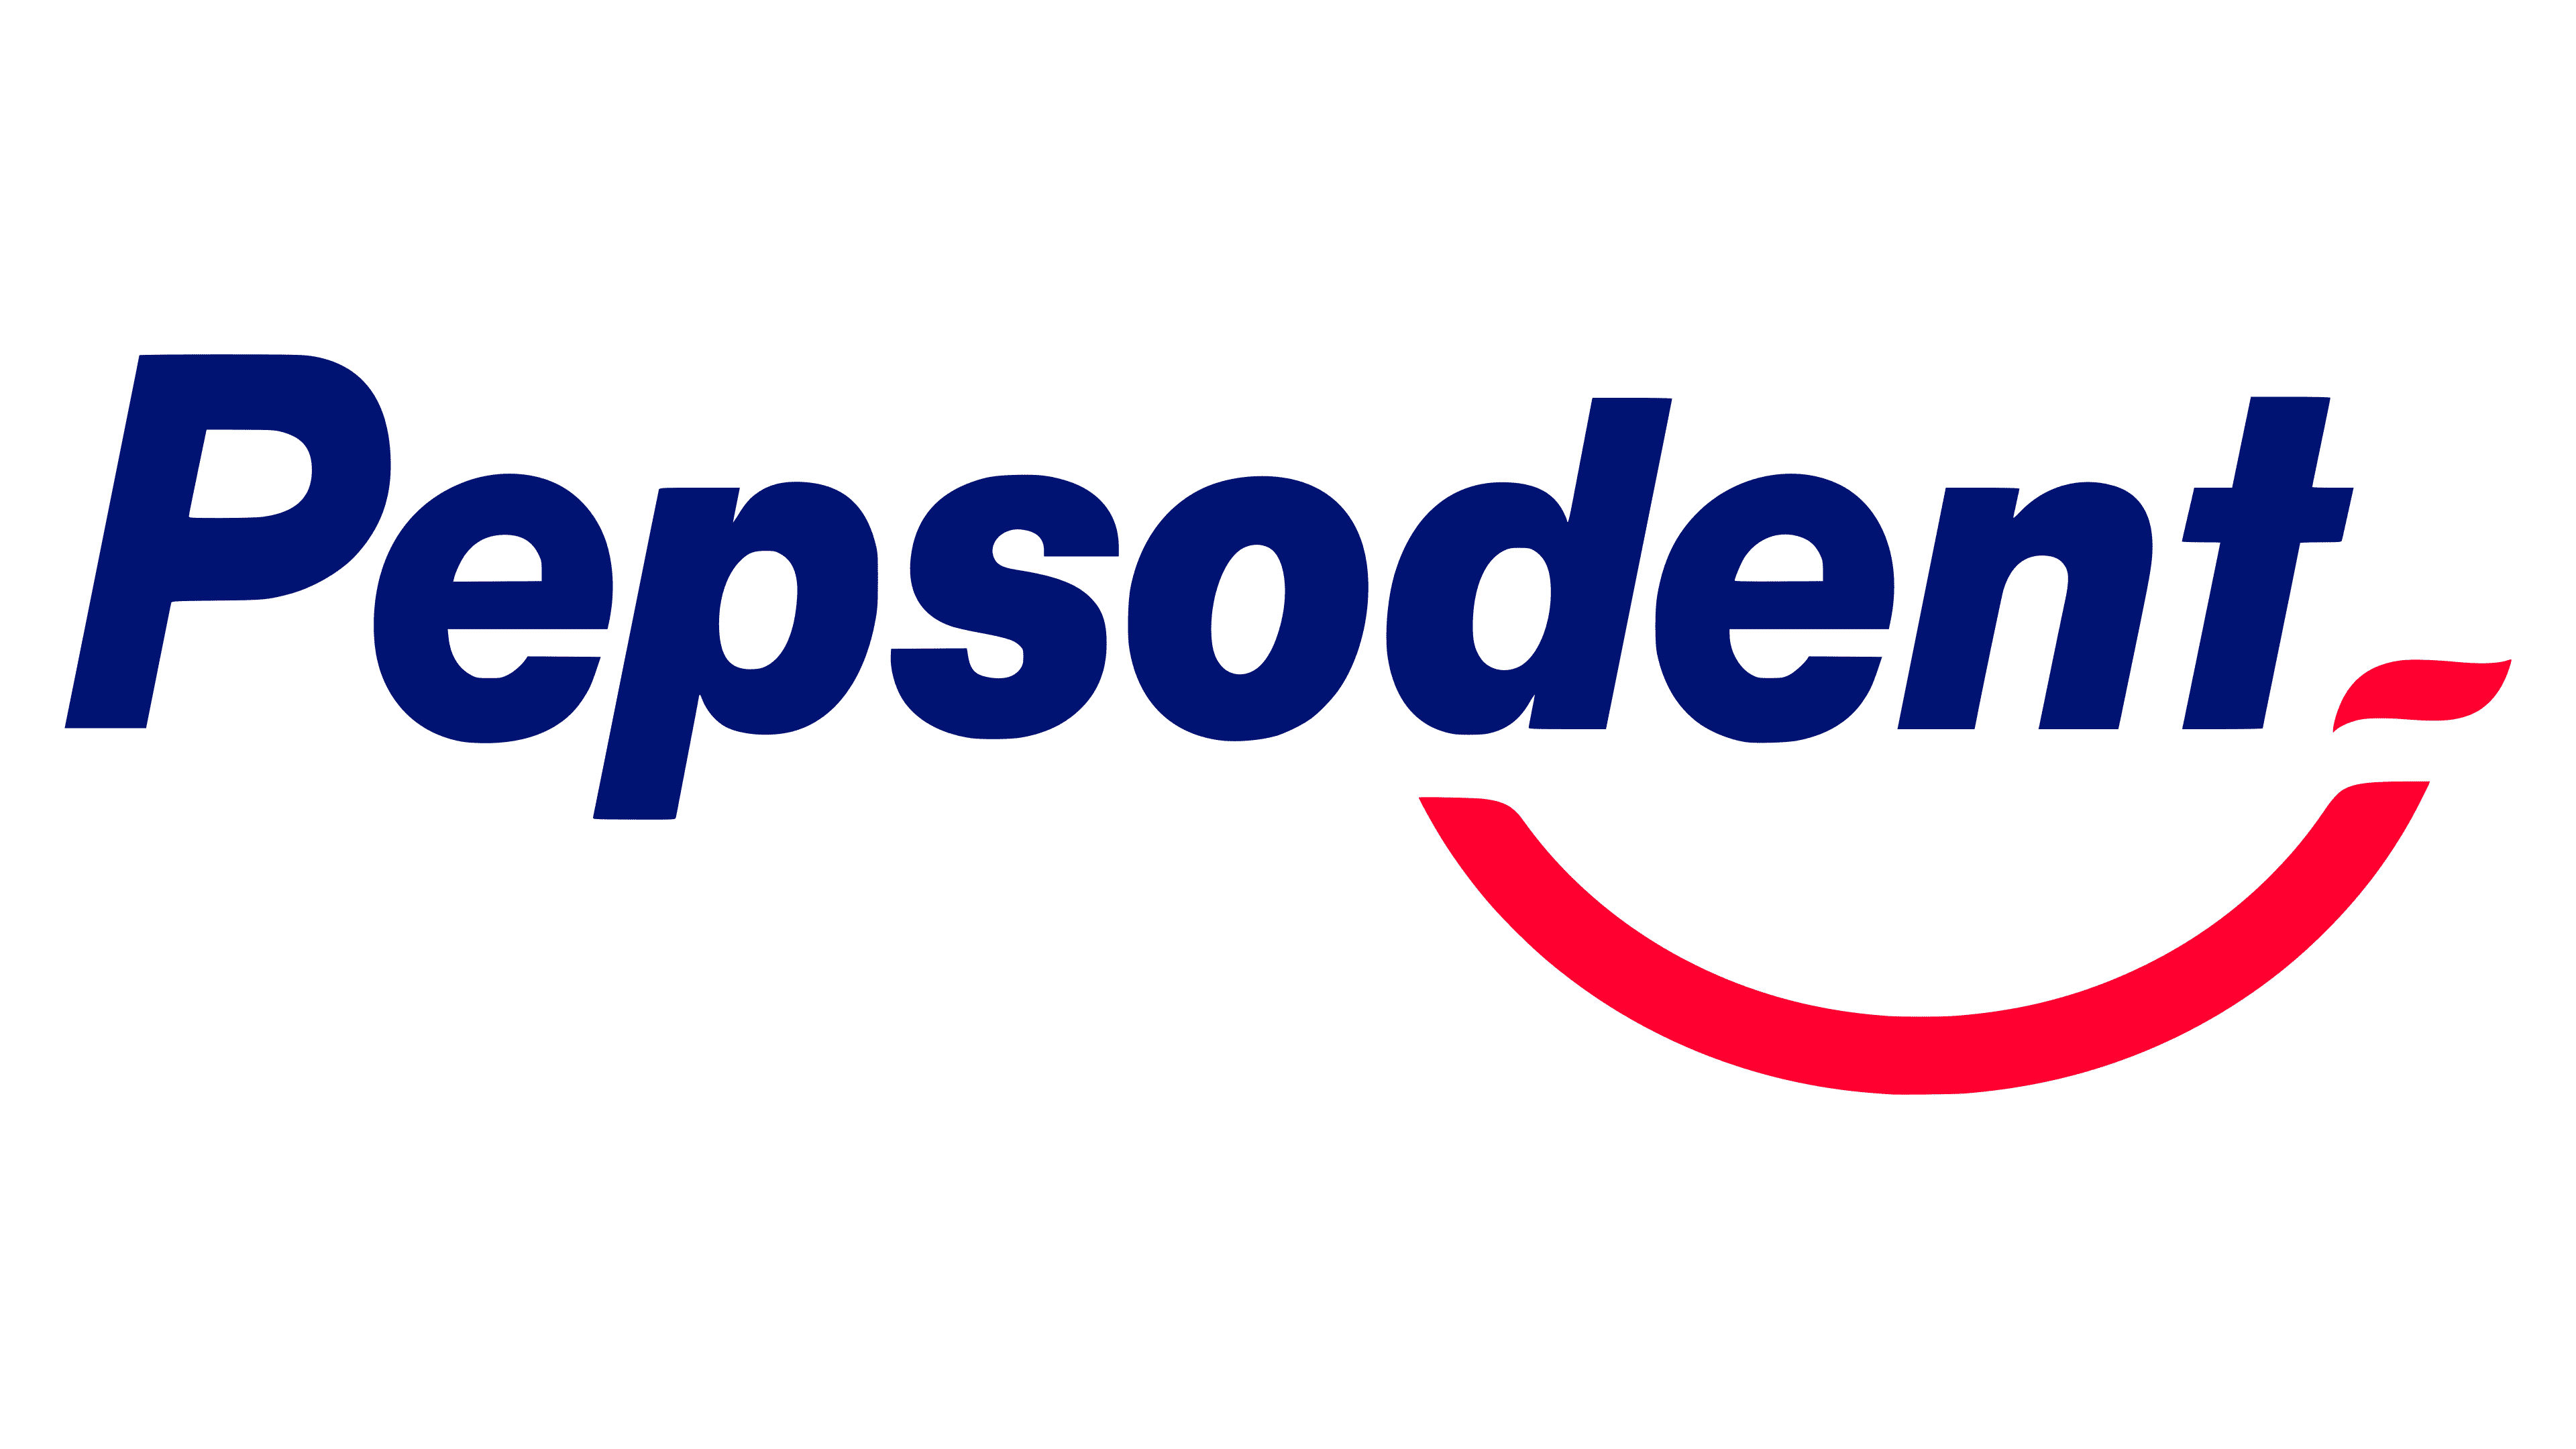 Pepsodent Logo, PNG, Symbol, History, Meaning